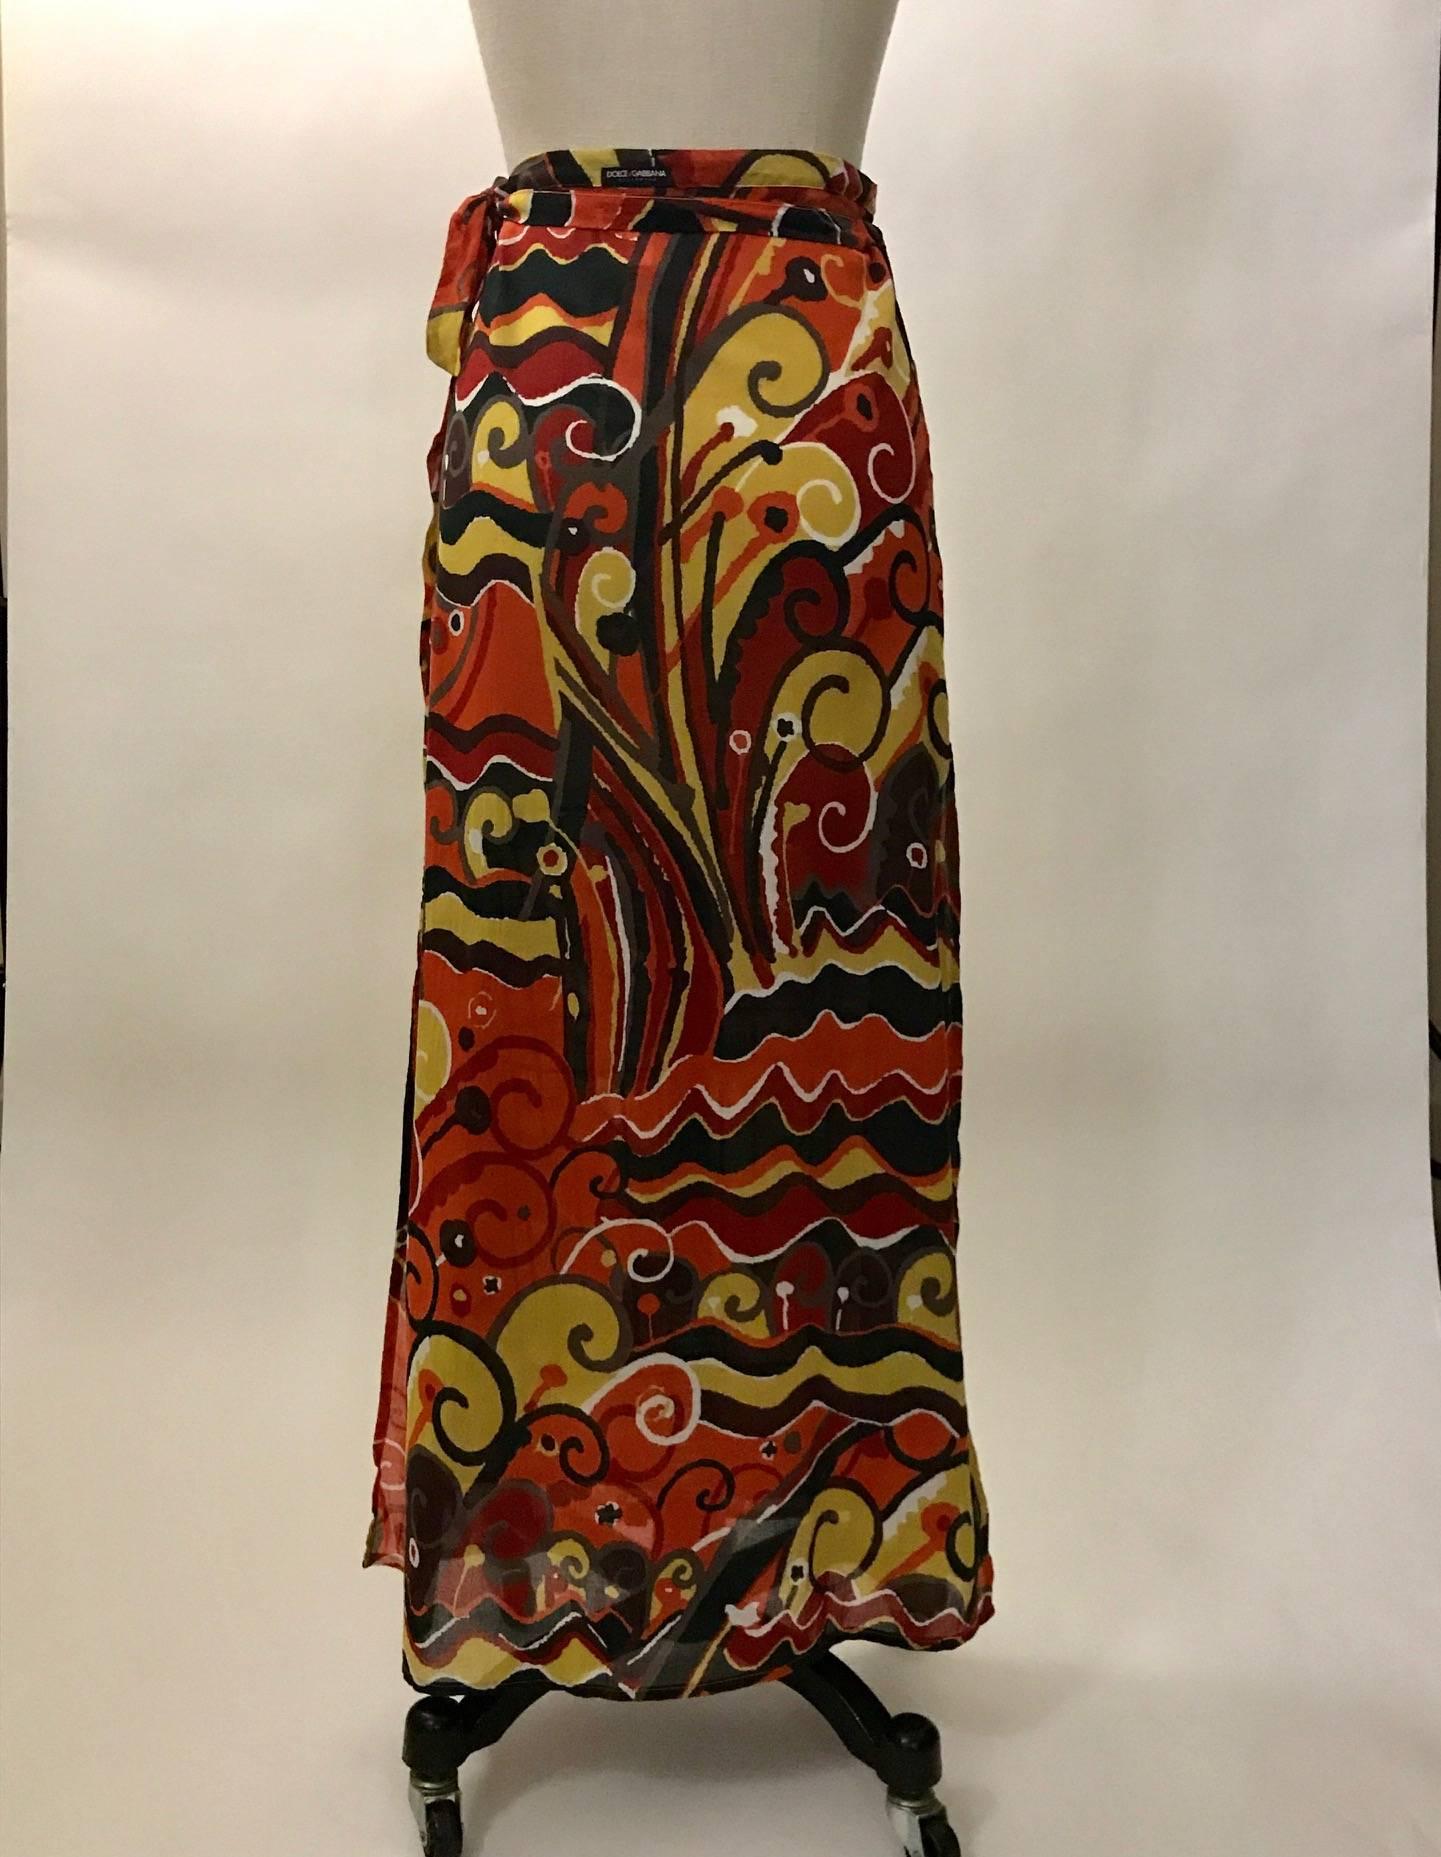 Dolce & Gabbana Beachwear orange wrap skirt with a batik like pattern throughout. Side slits, wrap ties at top. Small black Dolce & Gabbana beachwear label at exterior back. 

100% cotton.

Made in Italy.

Labelled size IT 1, US P.